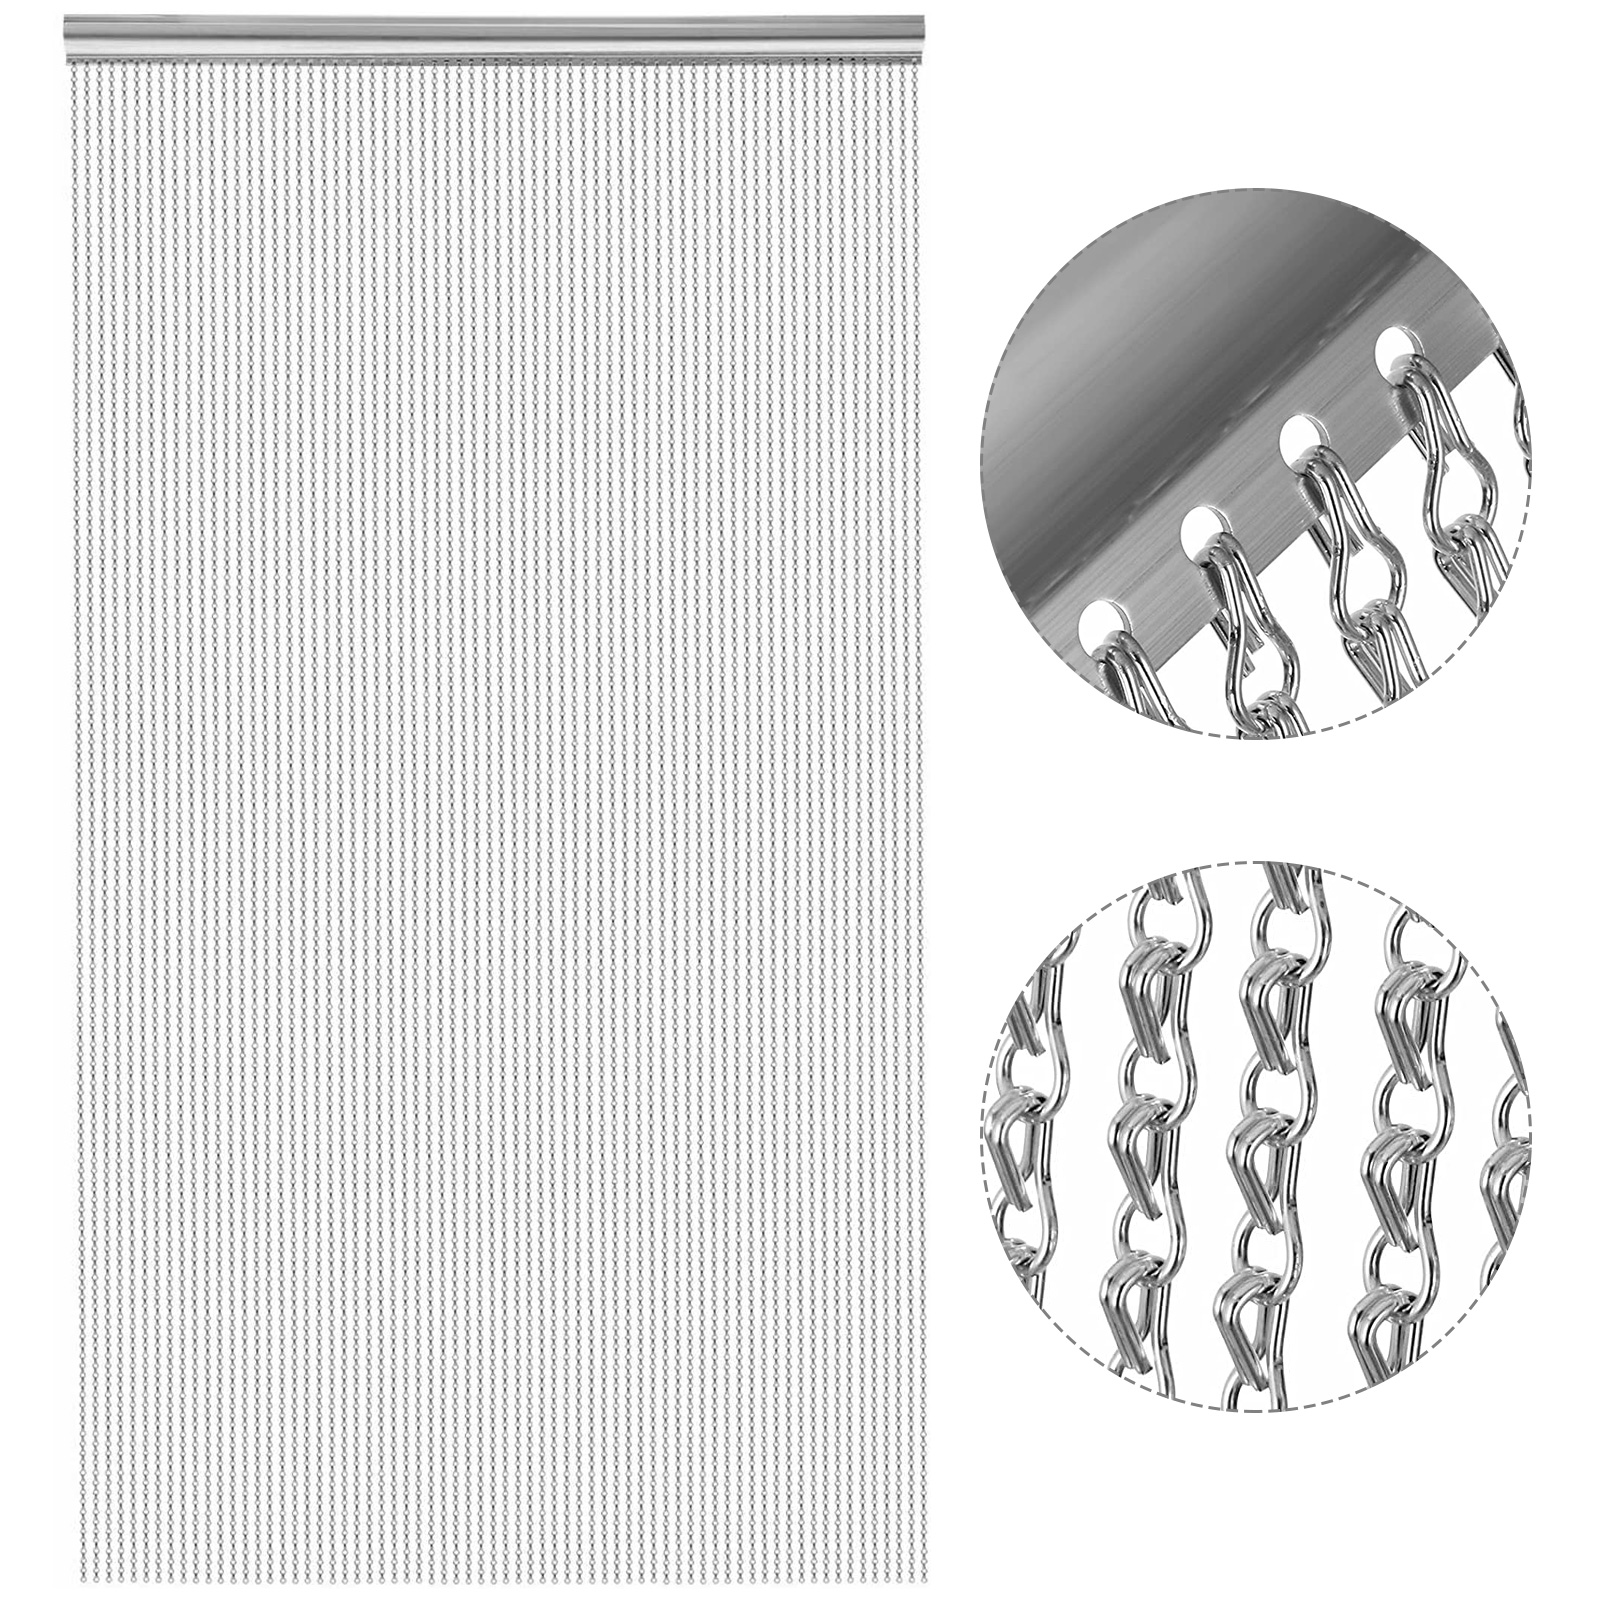 Voilamart Aluminum Metal Chain Fly Insect Door Screen Curtain Pest Control 